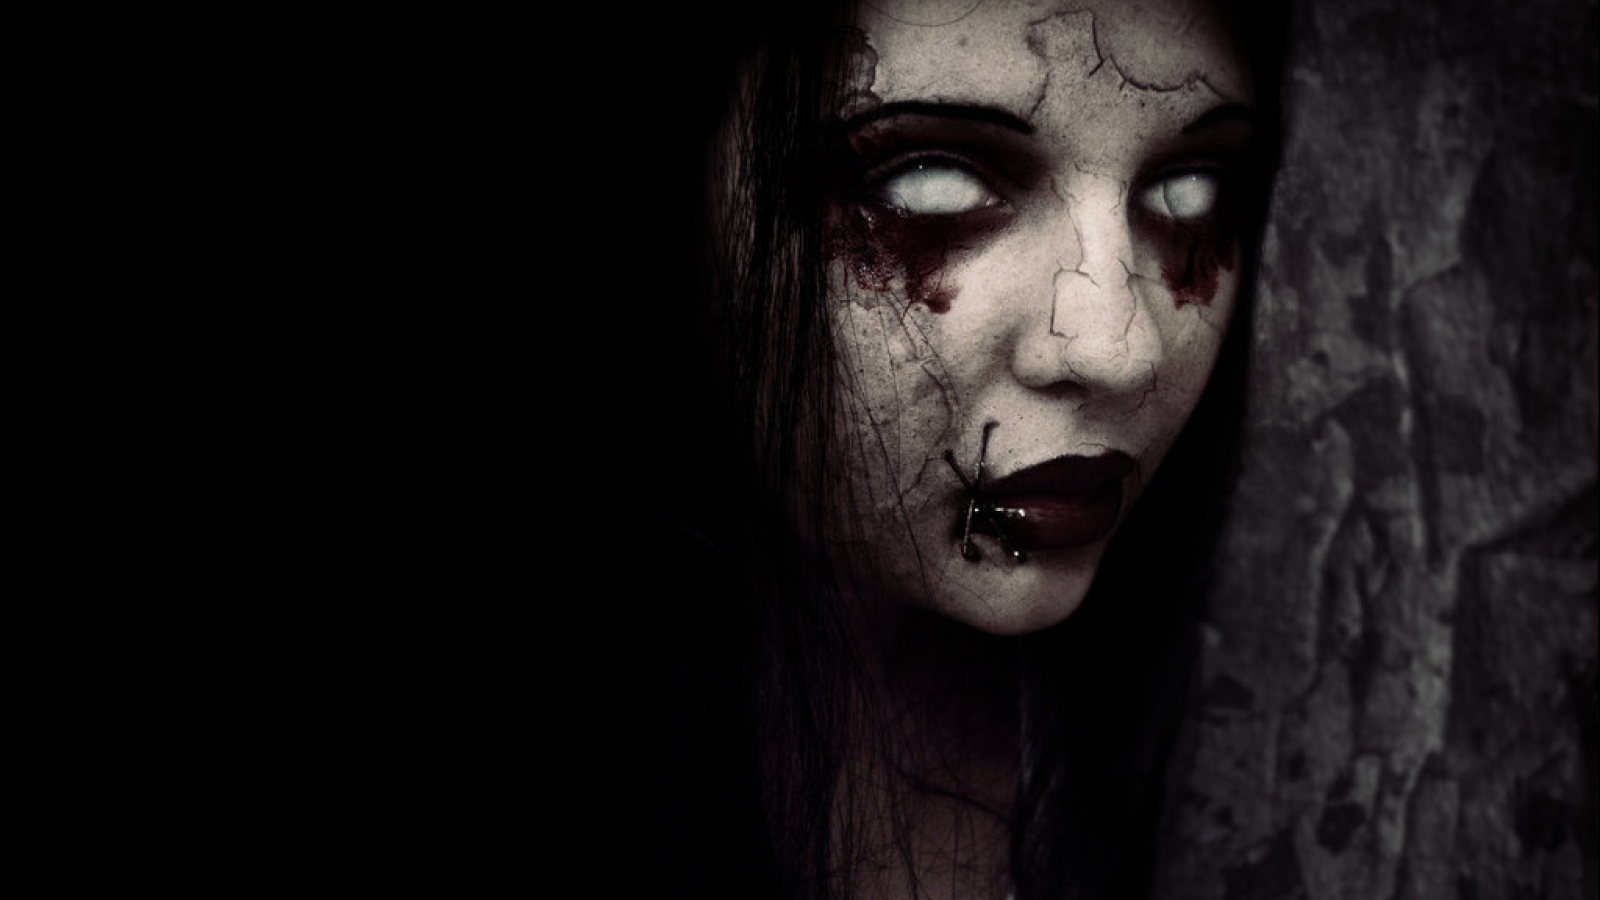  Name 780707 Wallpapers Of The Day Creepy 1600x900 Creepy Photo